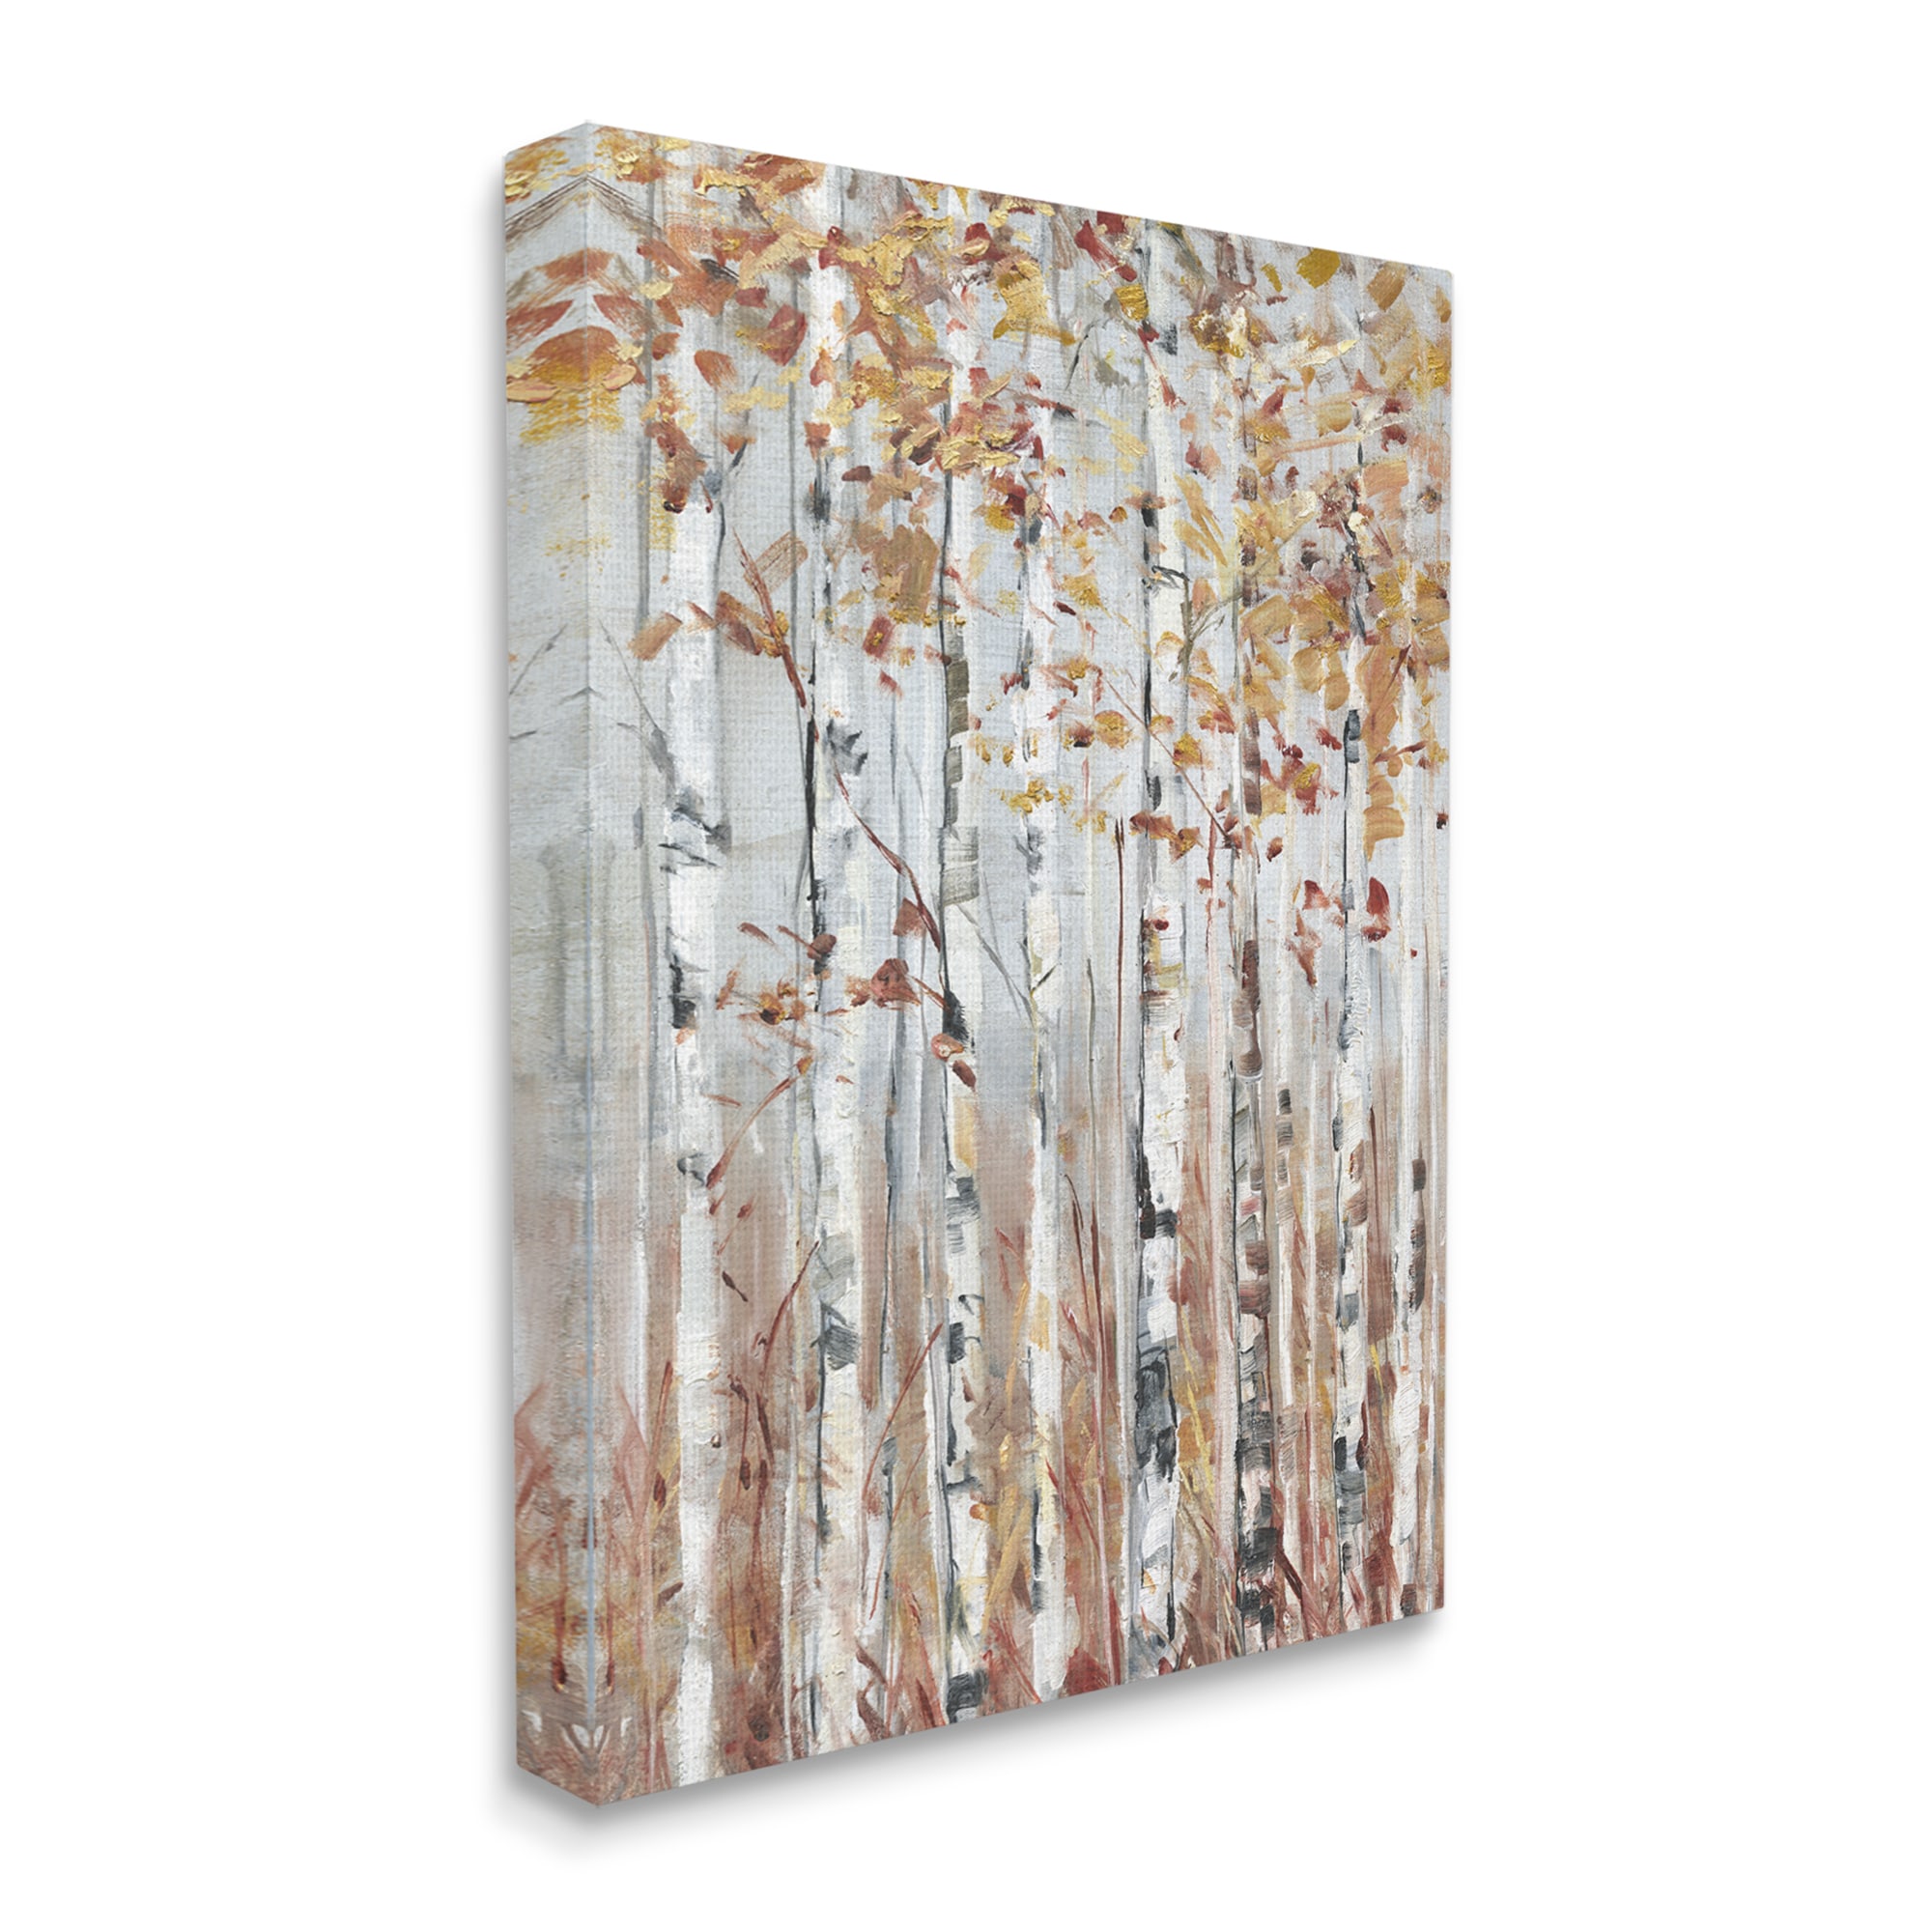 Stupell Industries Cream Bow Heels High Fashion Glam Bookstack Amanda  Greenwood 48-in H x 36-in W Abstract Print on Canvas in the Wall Art  department at